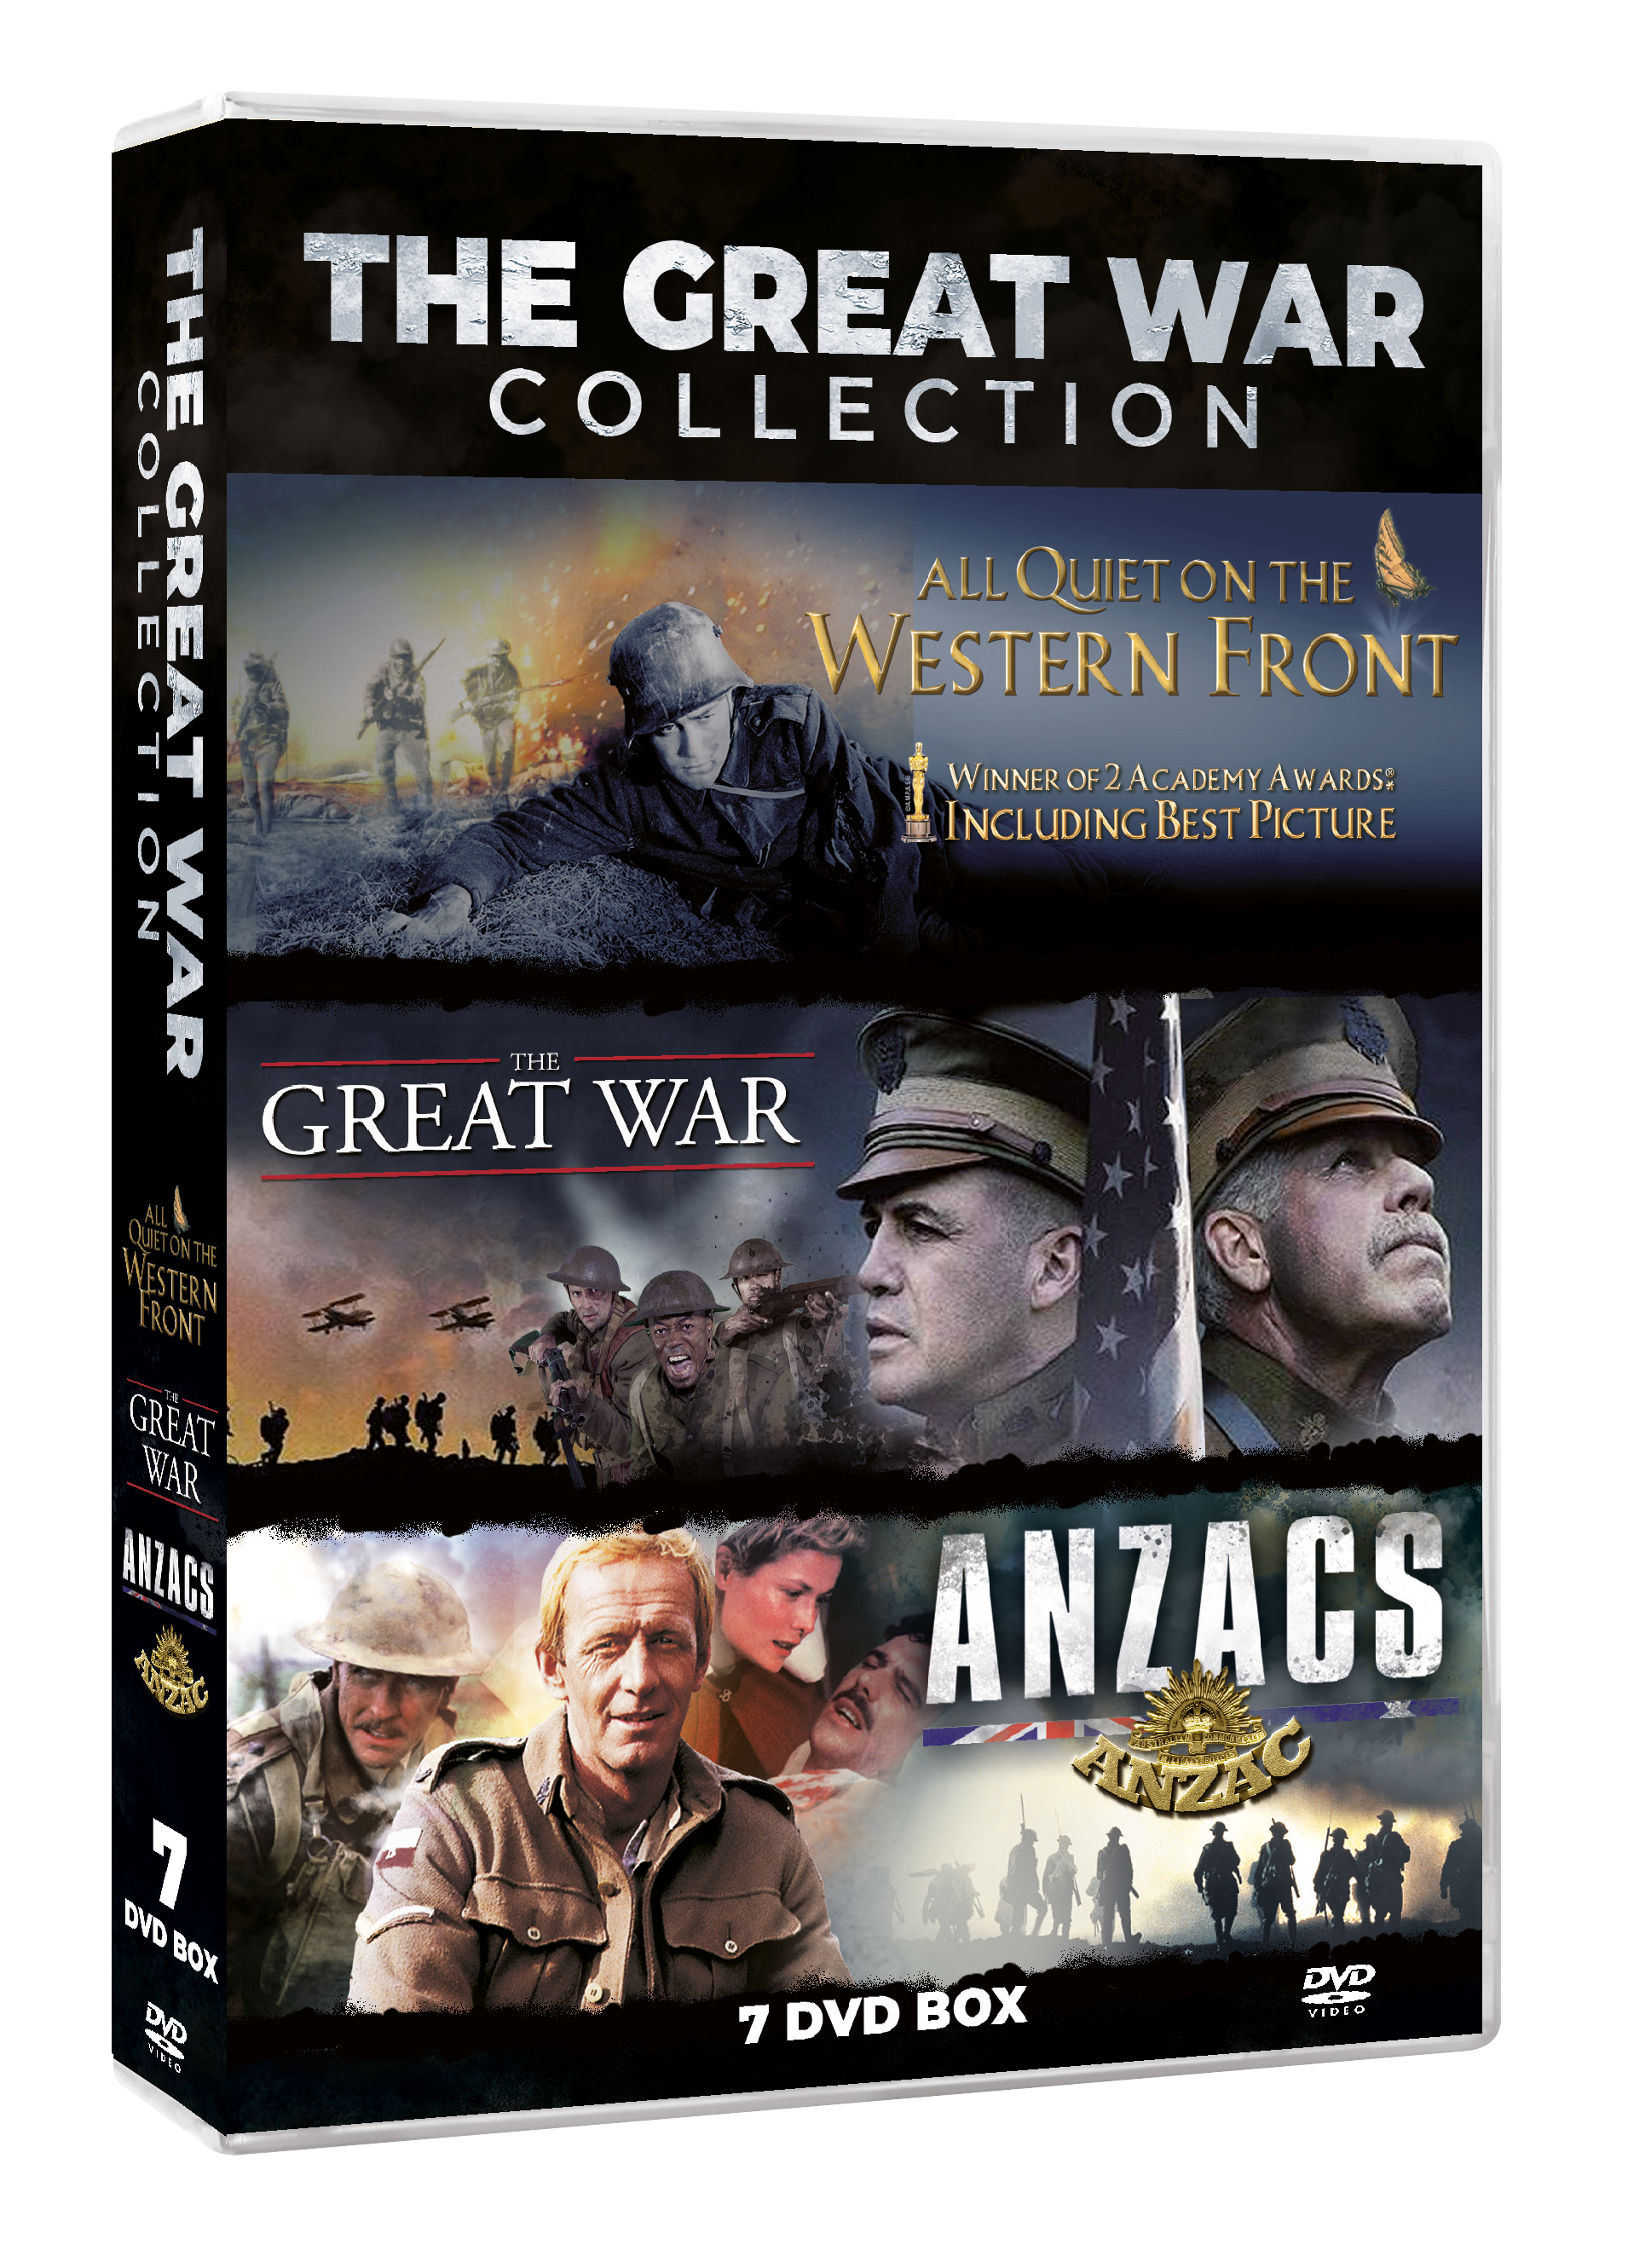 THE GREAT WORLD WAR 1 COLLECTION (7DVD BOX SET: LIMITED EDITION CONTAINS: Anzacs 5DVD MINISERIES - Great War 1 DVD - All Quiet on the Western Front 1 DVD Oscar Winner - Filmer og TV-serier